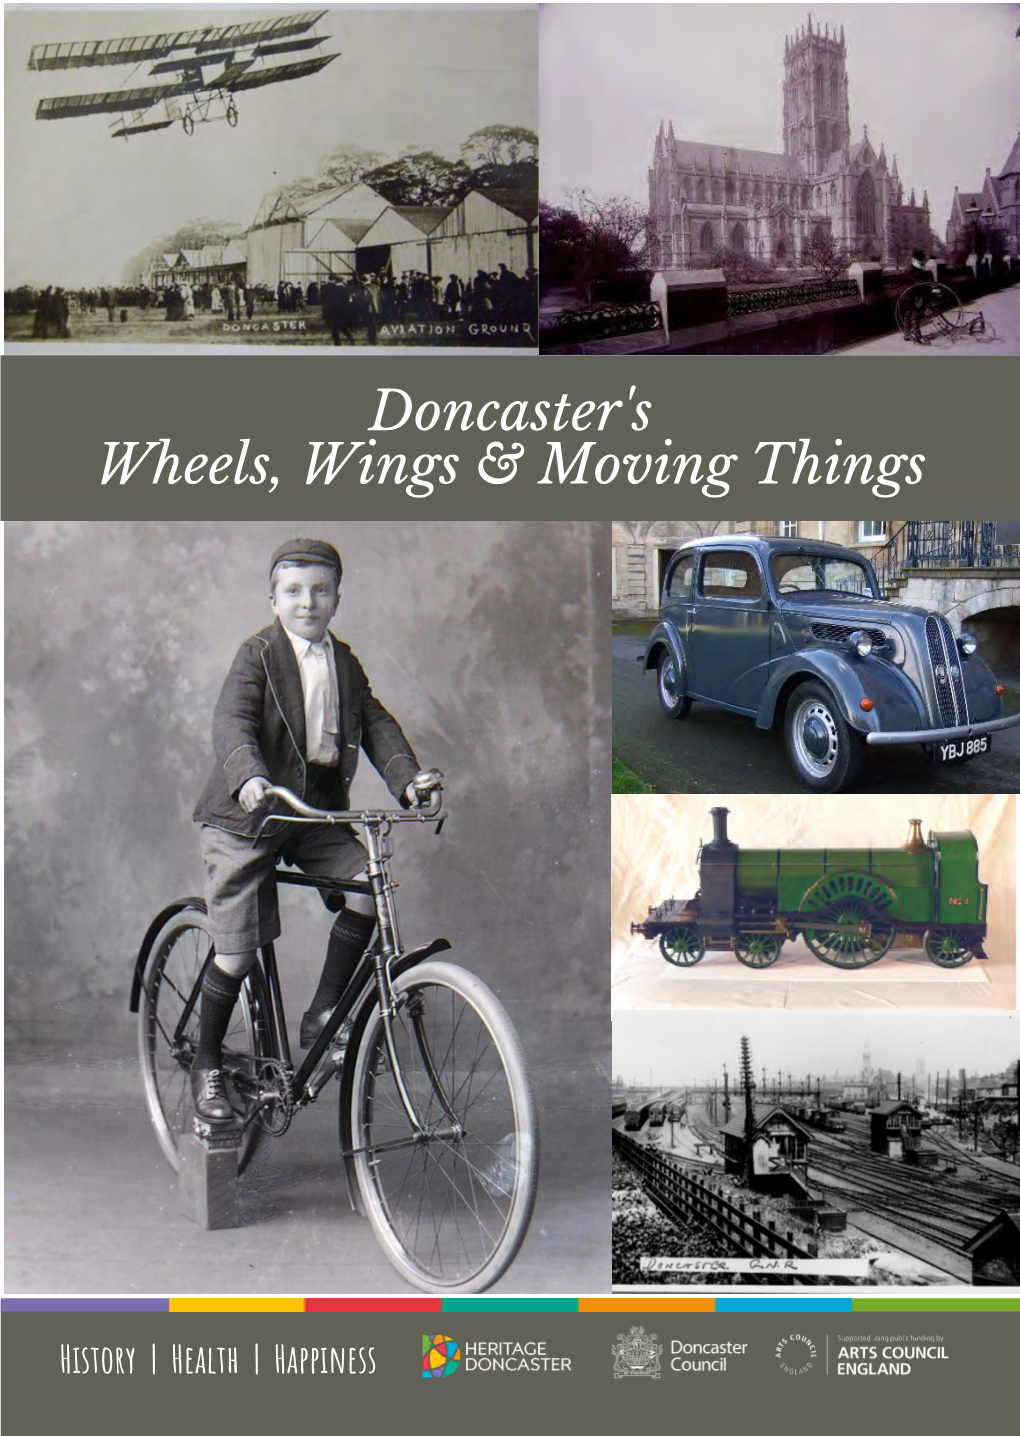 Doncaster's Wheels, Wings & Moving Things